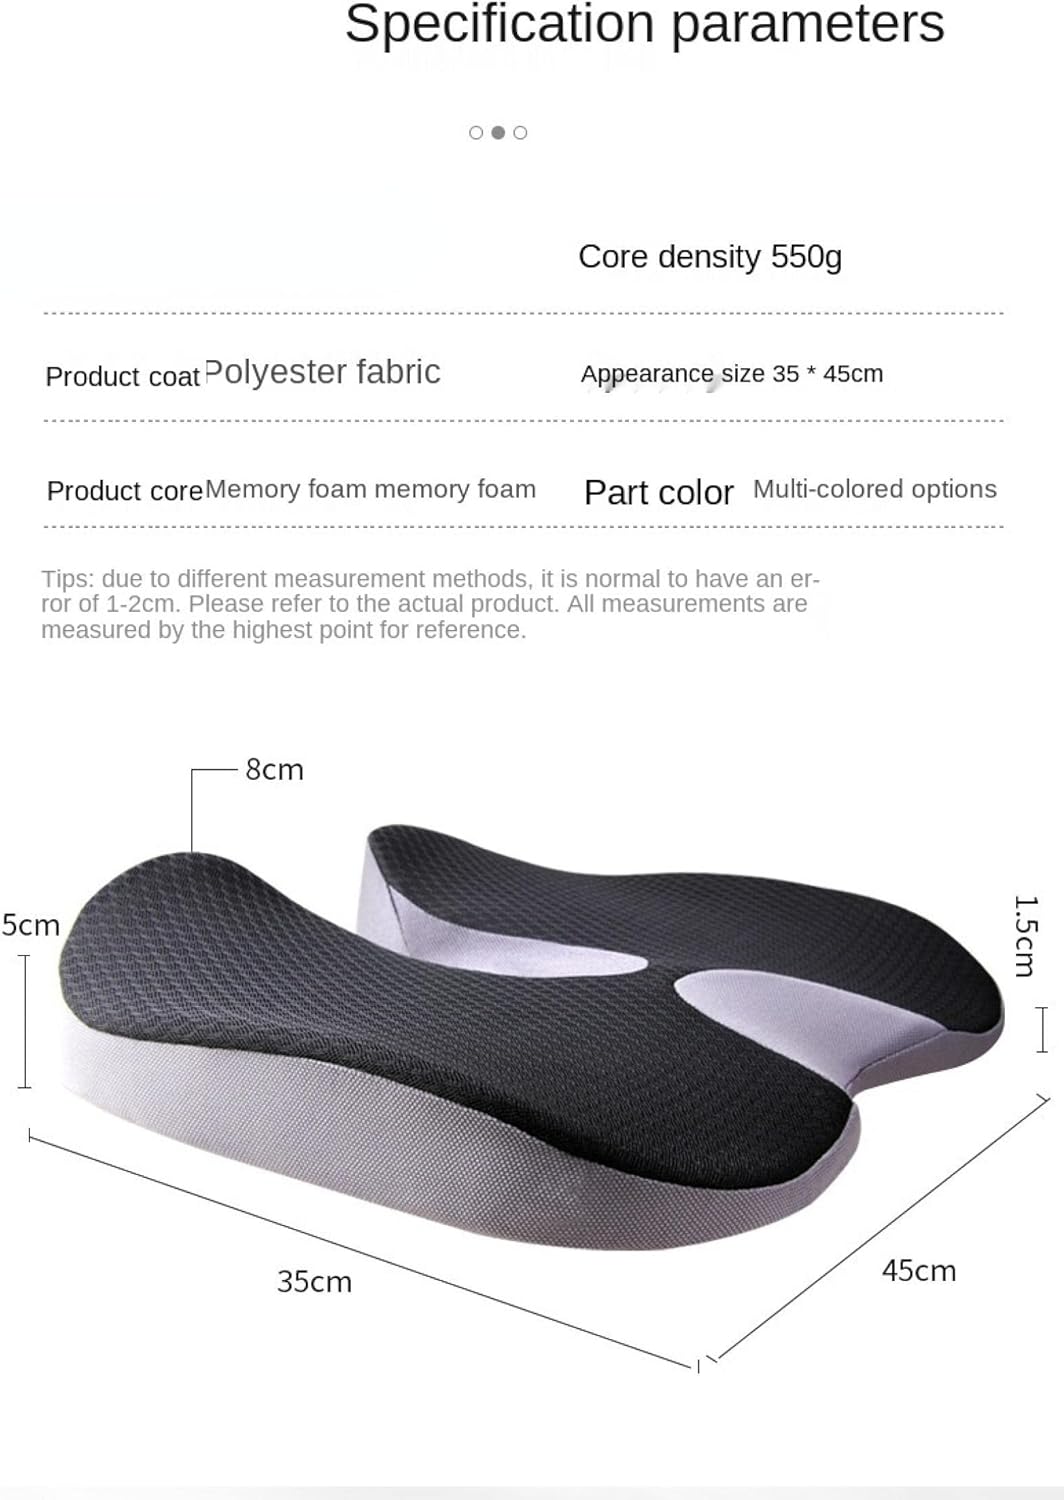 🔥LAST DAY SPECIAL SALE 65% OFF 🔥Cushion Non-Slip Orthopedic